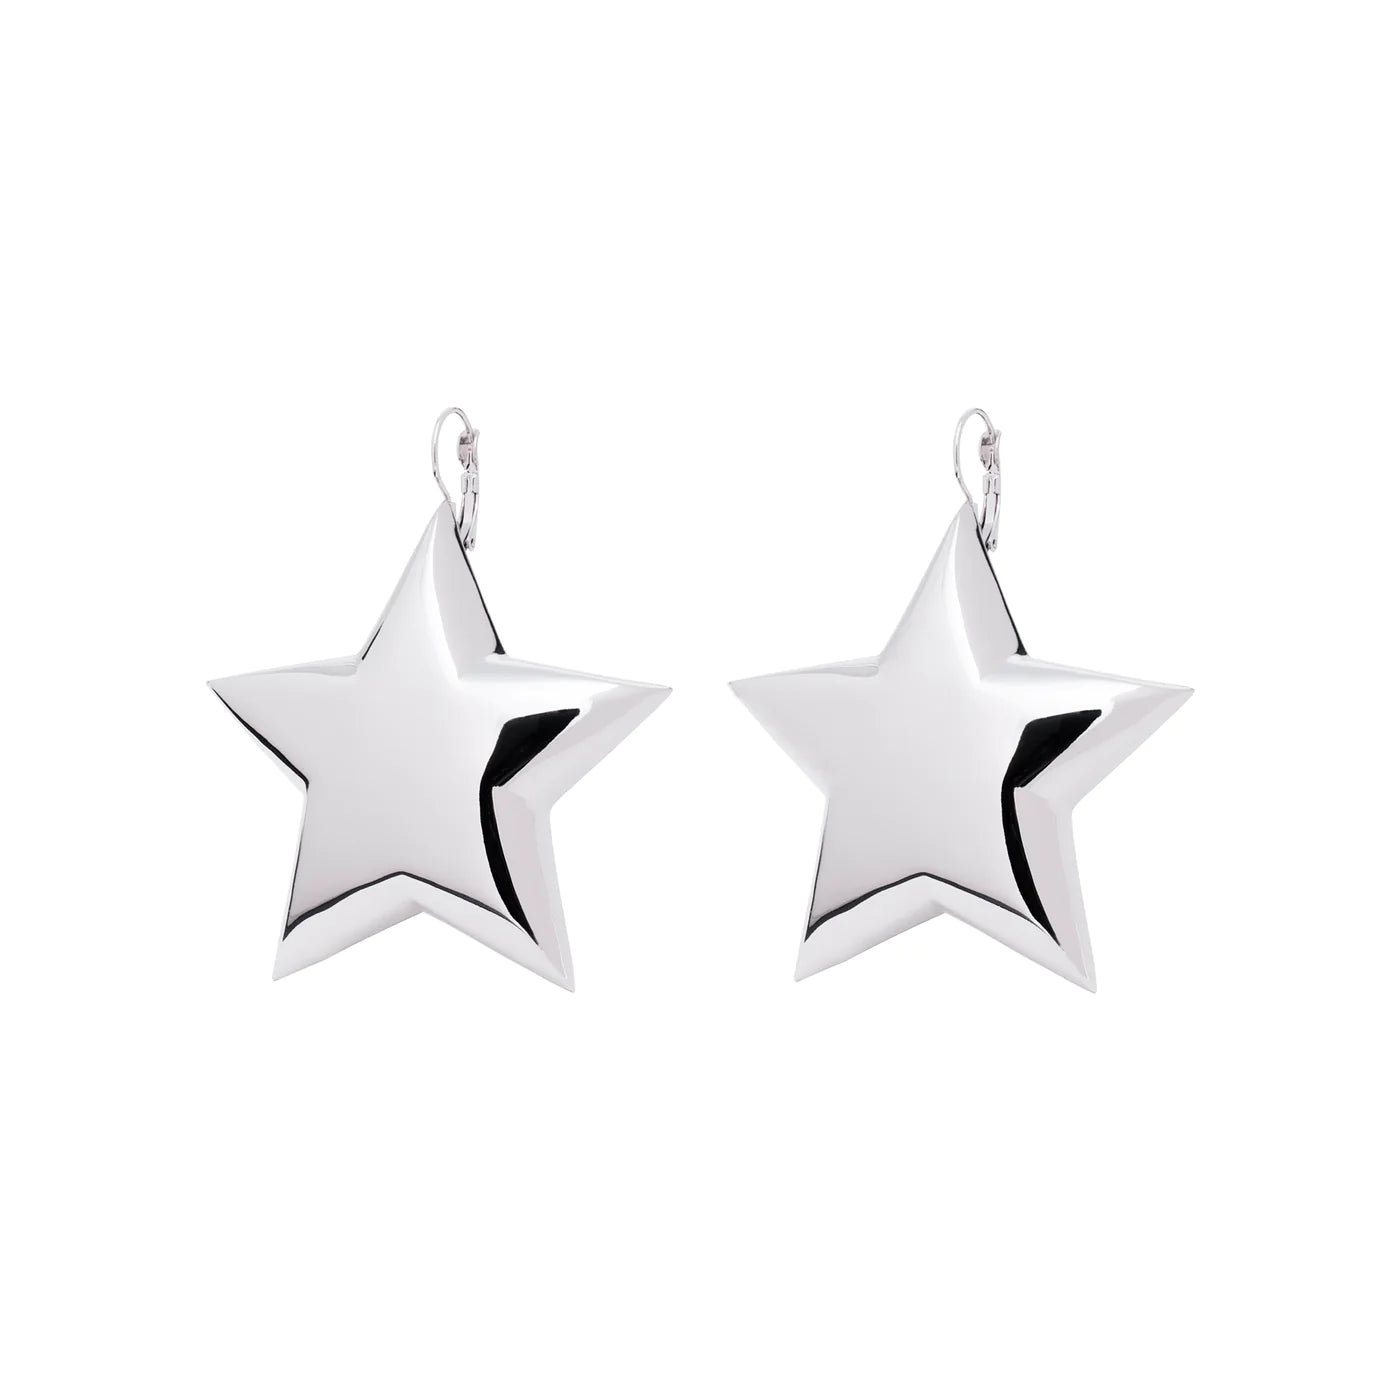 Passion Silver Earrings